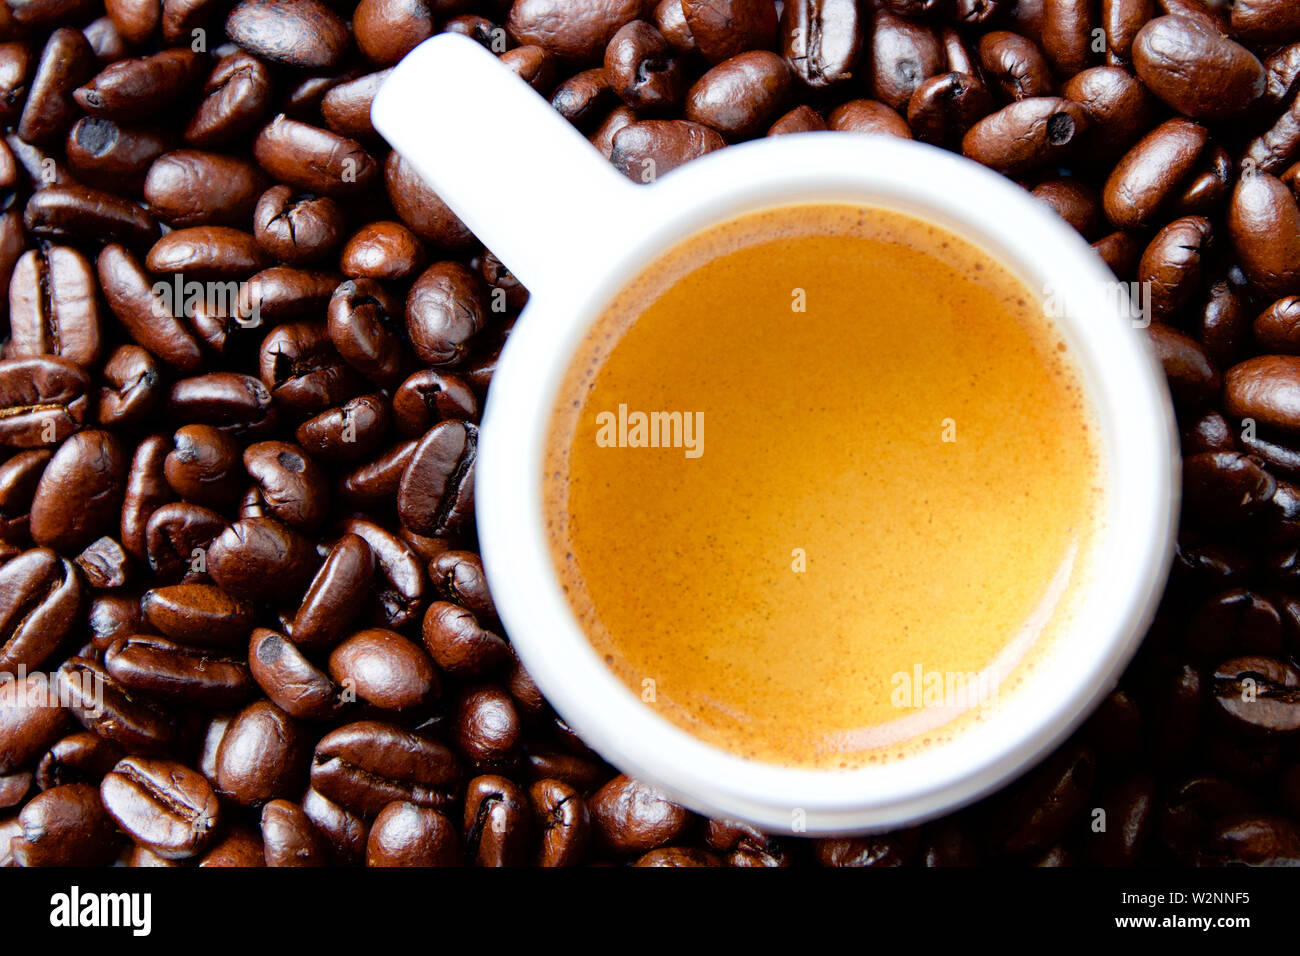 Espresso and coffee beans Stock Photo